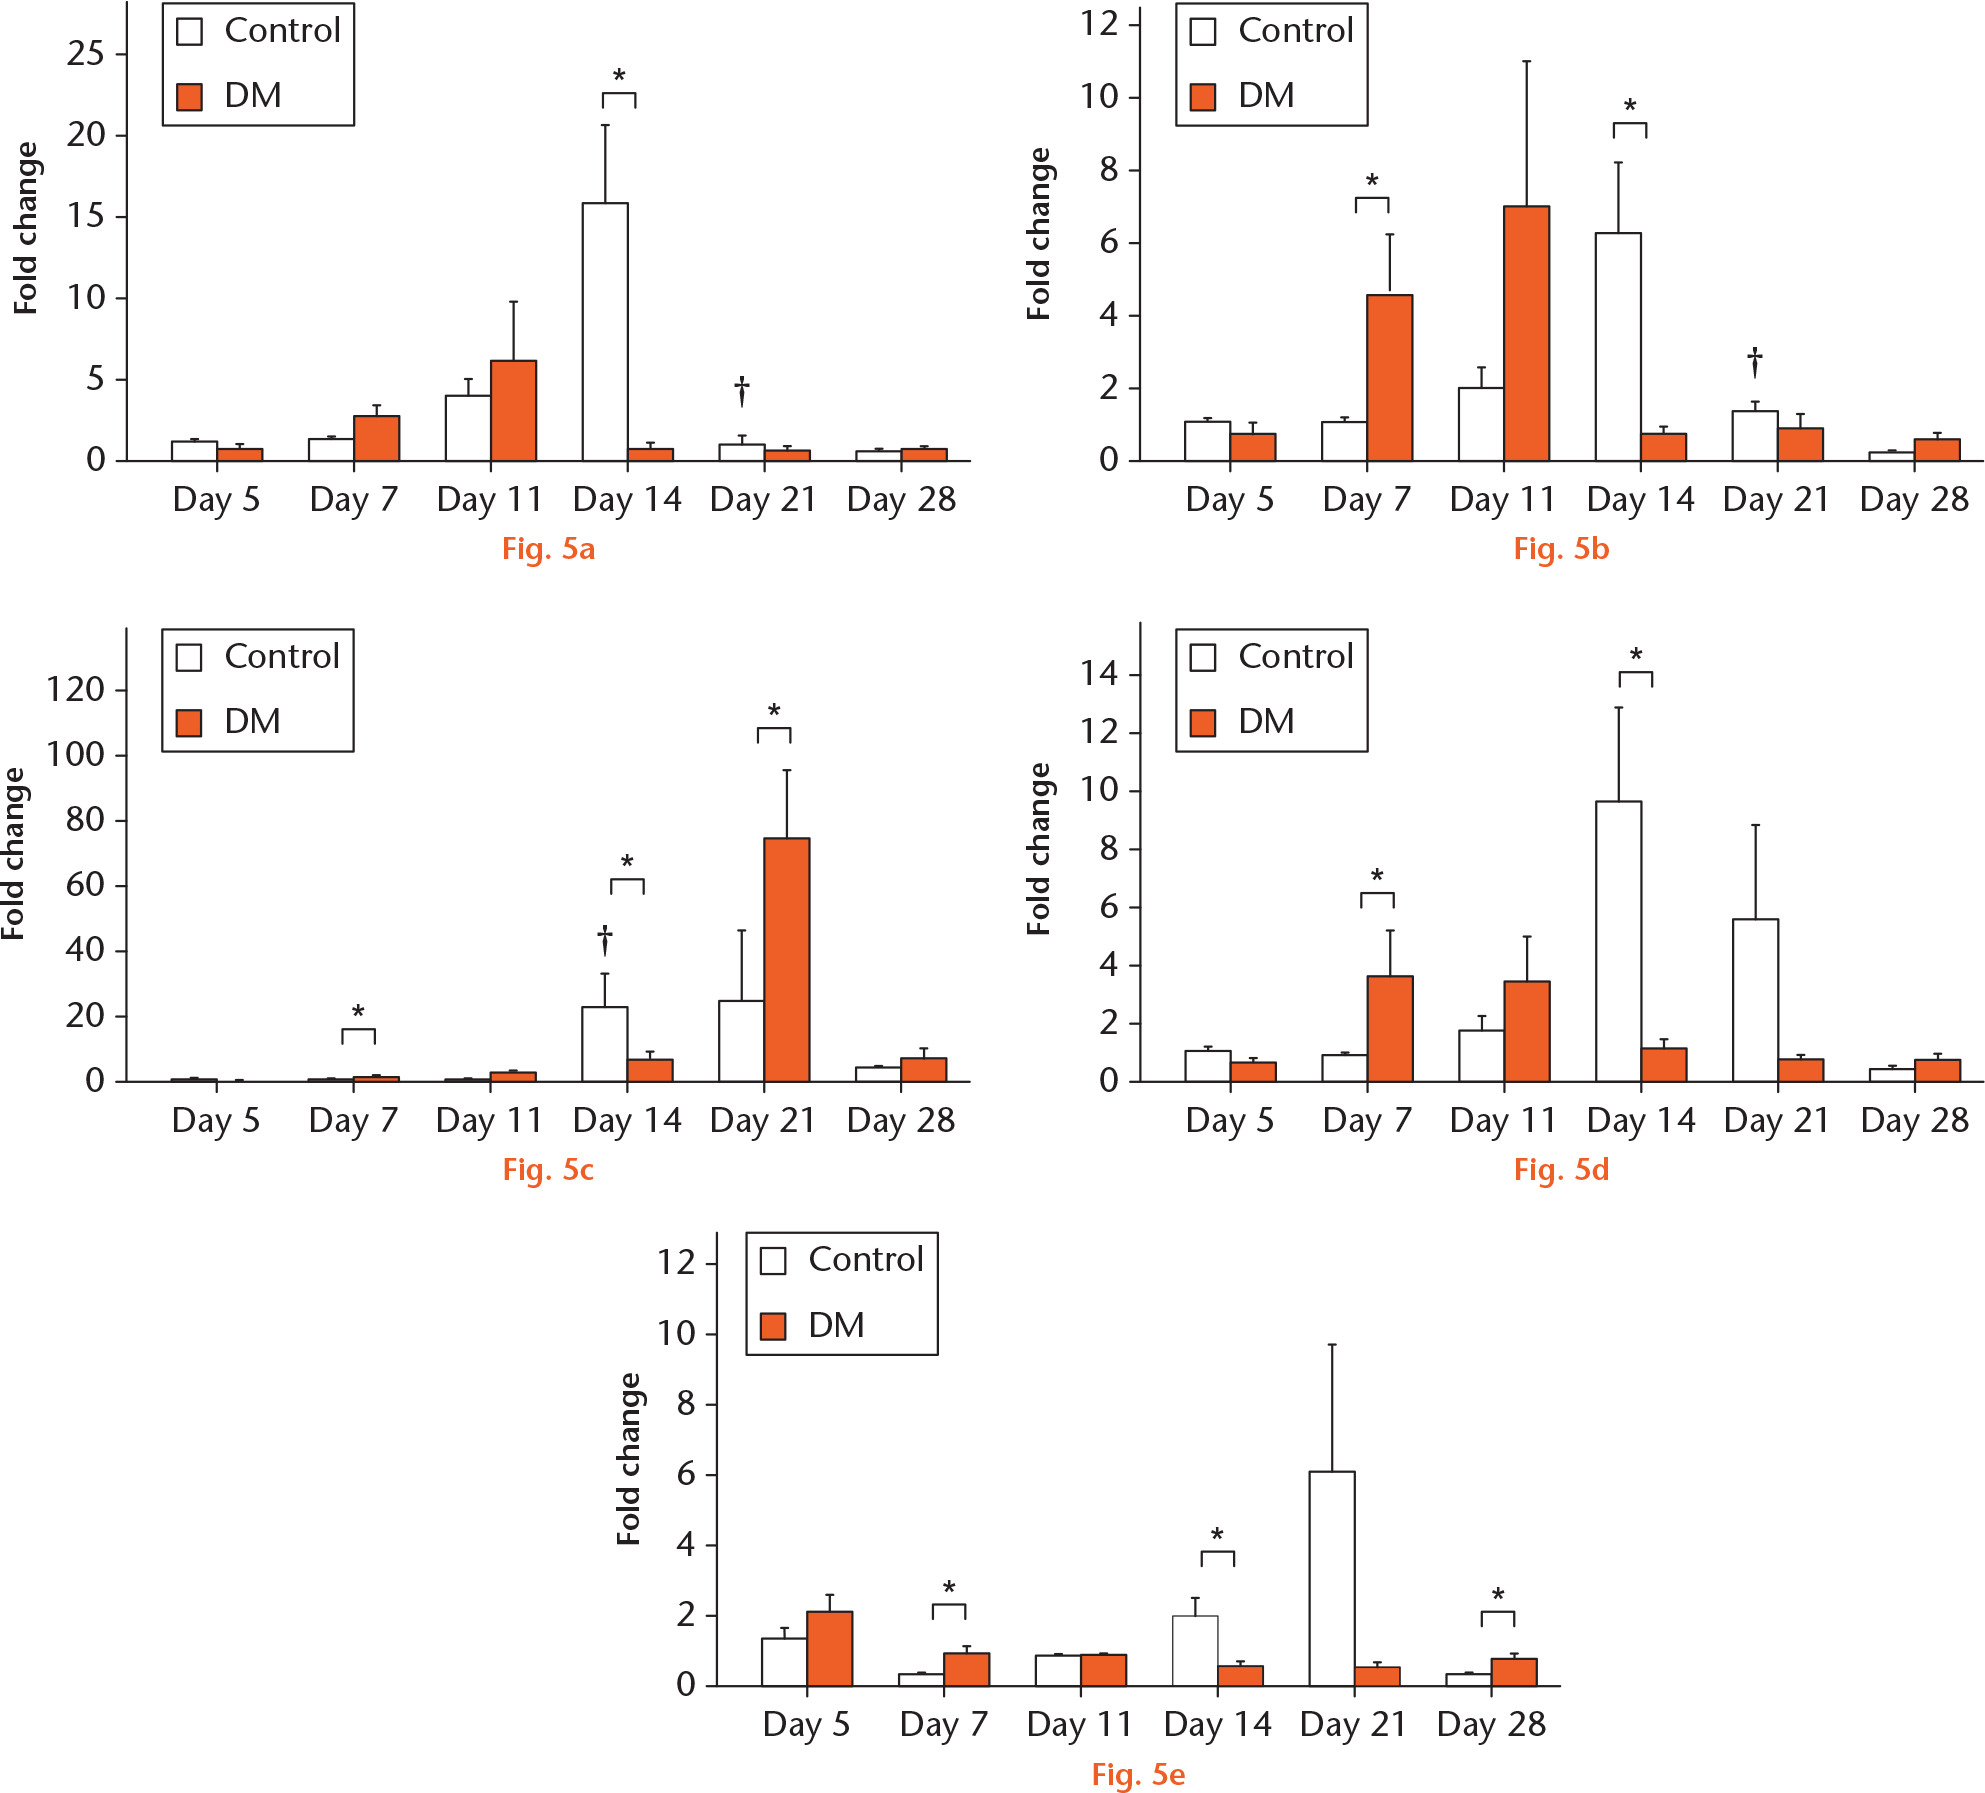  
            Graphs showing expression of a) miR-140-3p, b) miR-140-5p, c) miR-181a-1-3p, d) miR-210-3p, and e) miR-222-3p in the control group (white bars) and diabetes mellitus (DM) group (orange bars) on post-fracture days five, seven, 11, 14, 21, and 28, as analyzed by real-time polymerase chain reaction (PCR). All graphs show the fold change in expression when the expression in the control group on day five was normalized as 1. Values are the mean and standard error of the mean (n = 6 in each group at each timepoint). *p < 0.05 for indicated groups at the same timepoint. †p < 0.05 versus values on the former timepoint in the control group. p-values calculated using Mann–Whitney U test with Bonferroni correction.
          